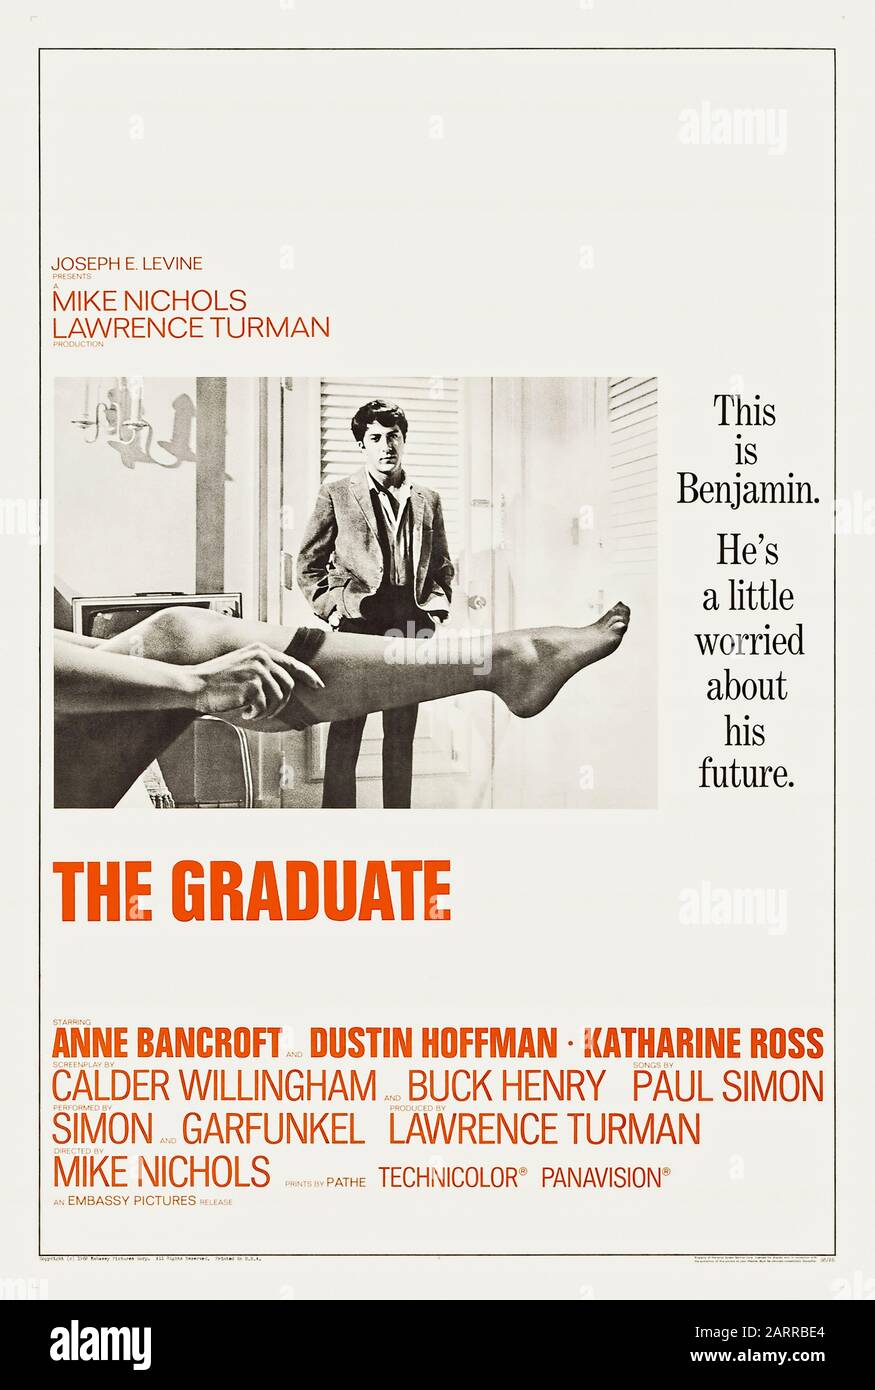 The Graduate (1967) directed by Mike Nichols and starring  Dustin Hoffman, Anne Bancroft, Katharine Ross and William Daniels. Successful and critically acclaimed adaptation of Charles Webb’s novel about a recent graduate who is seduced by the older Mrs Robinson before falling in love with her daughter. Stock Photo